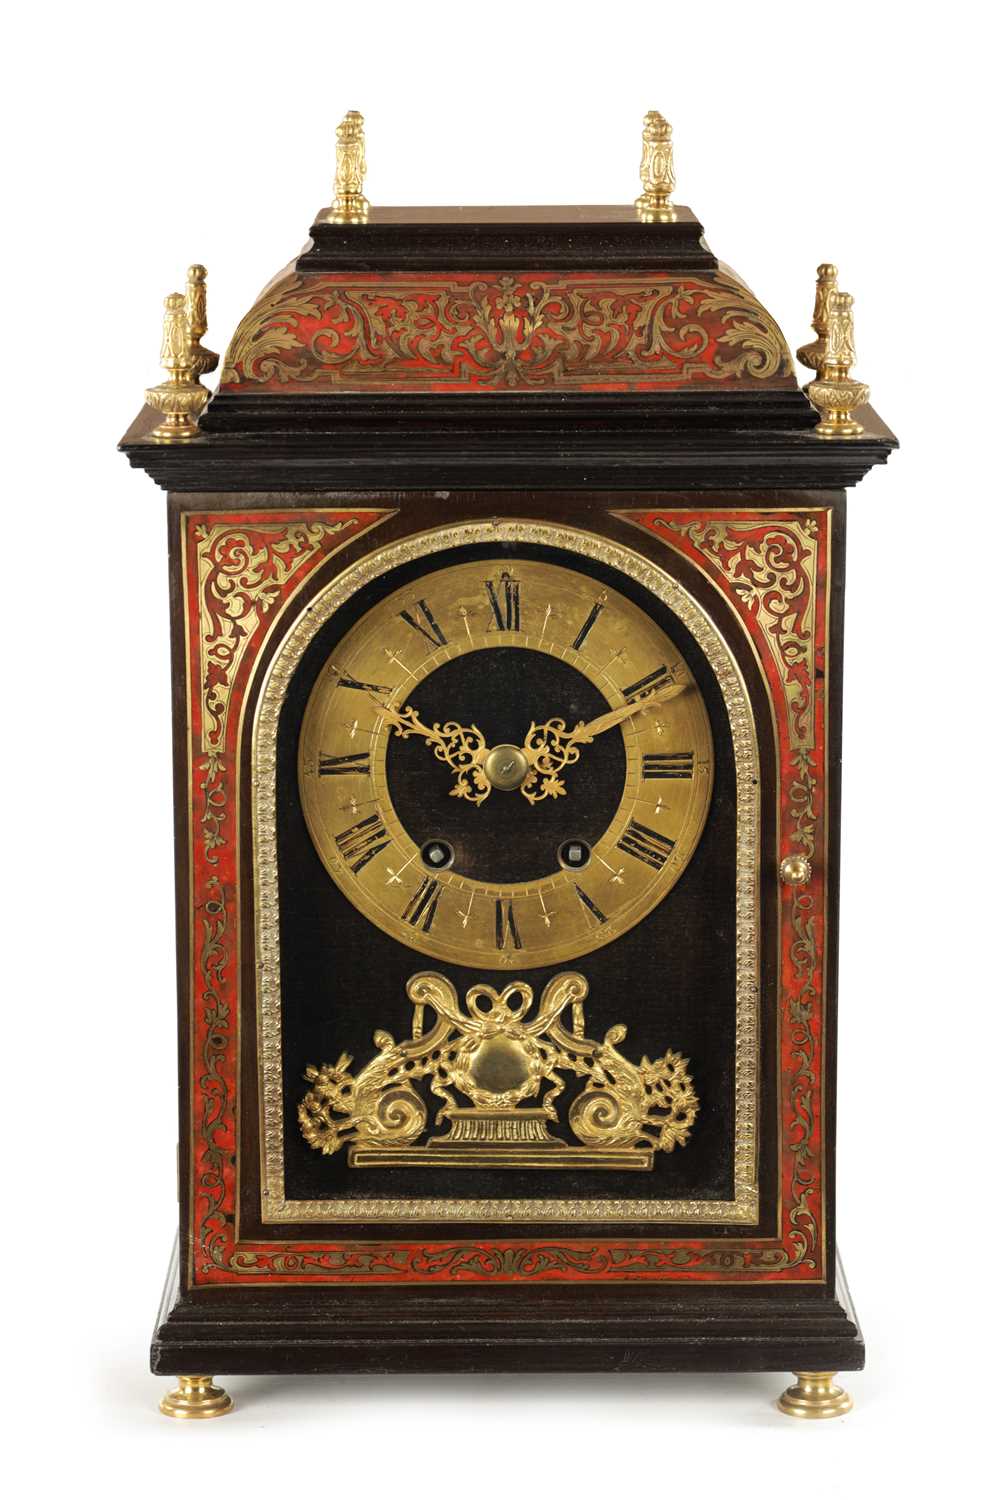 A LATE 19TH CENTURY FRENCH BOULLE MANTEL CLOCK